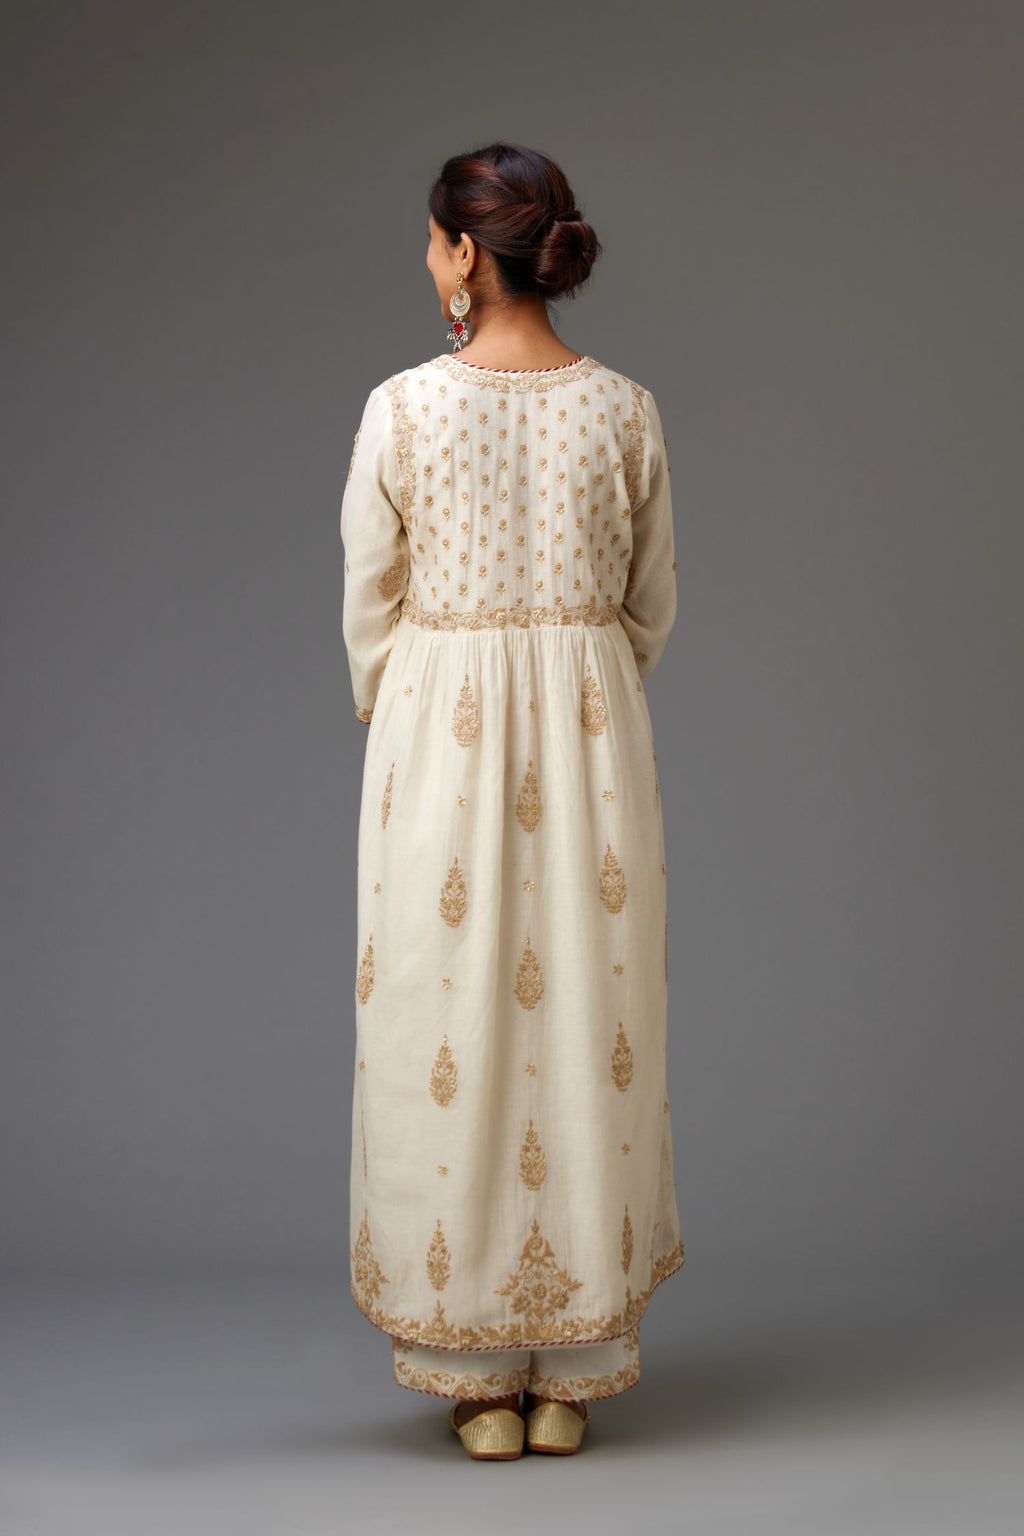 Off white cotton chanderi kurta-dress set with dori and gota embroidery, highlighted with gold sequins work.